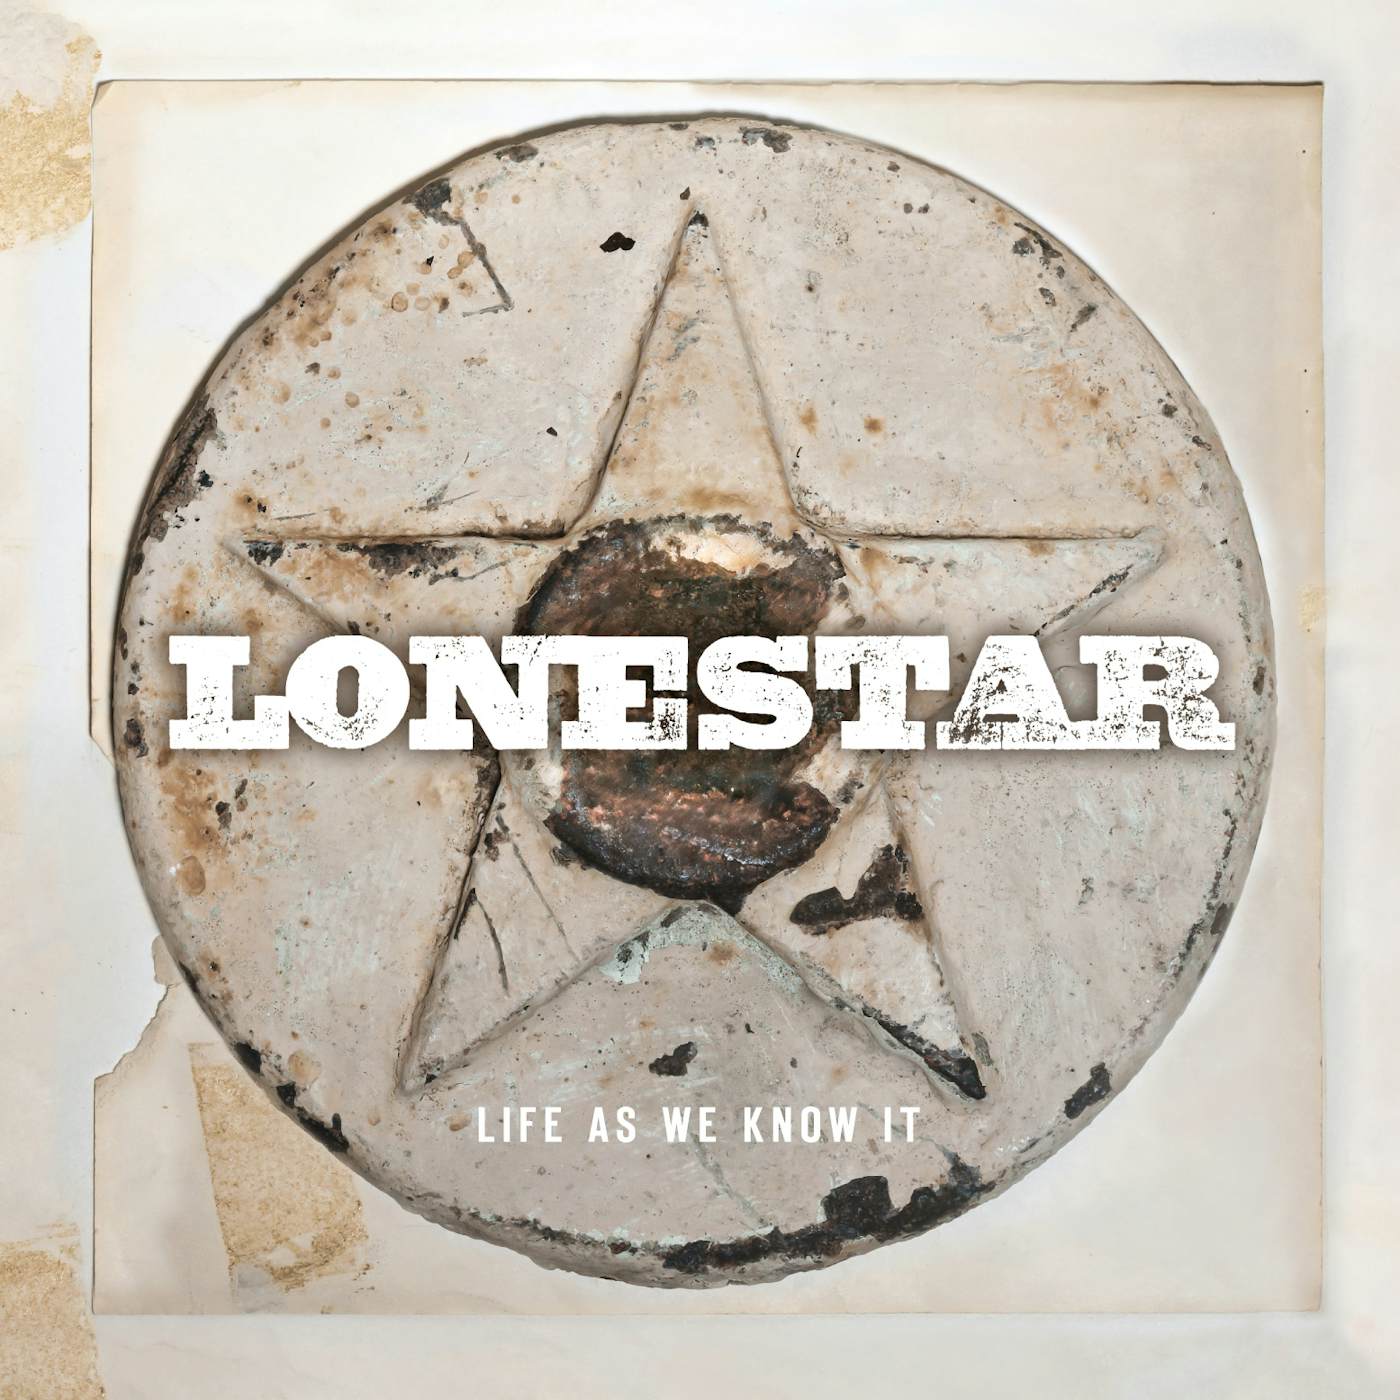 Lonestar LIFE AS WE KNOW IT CD